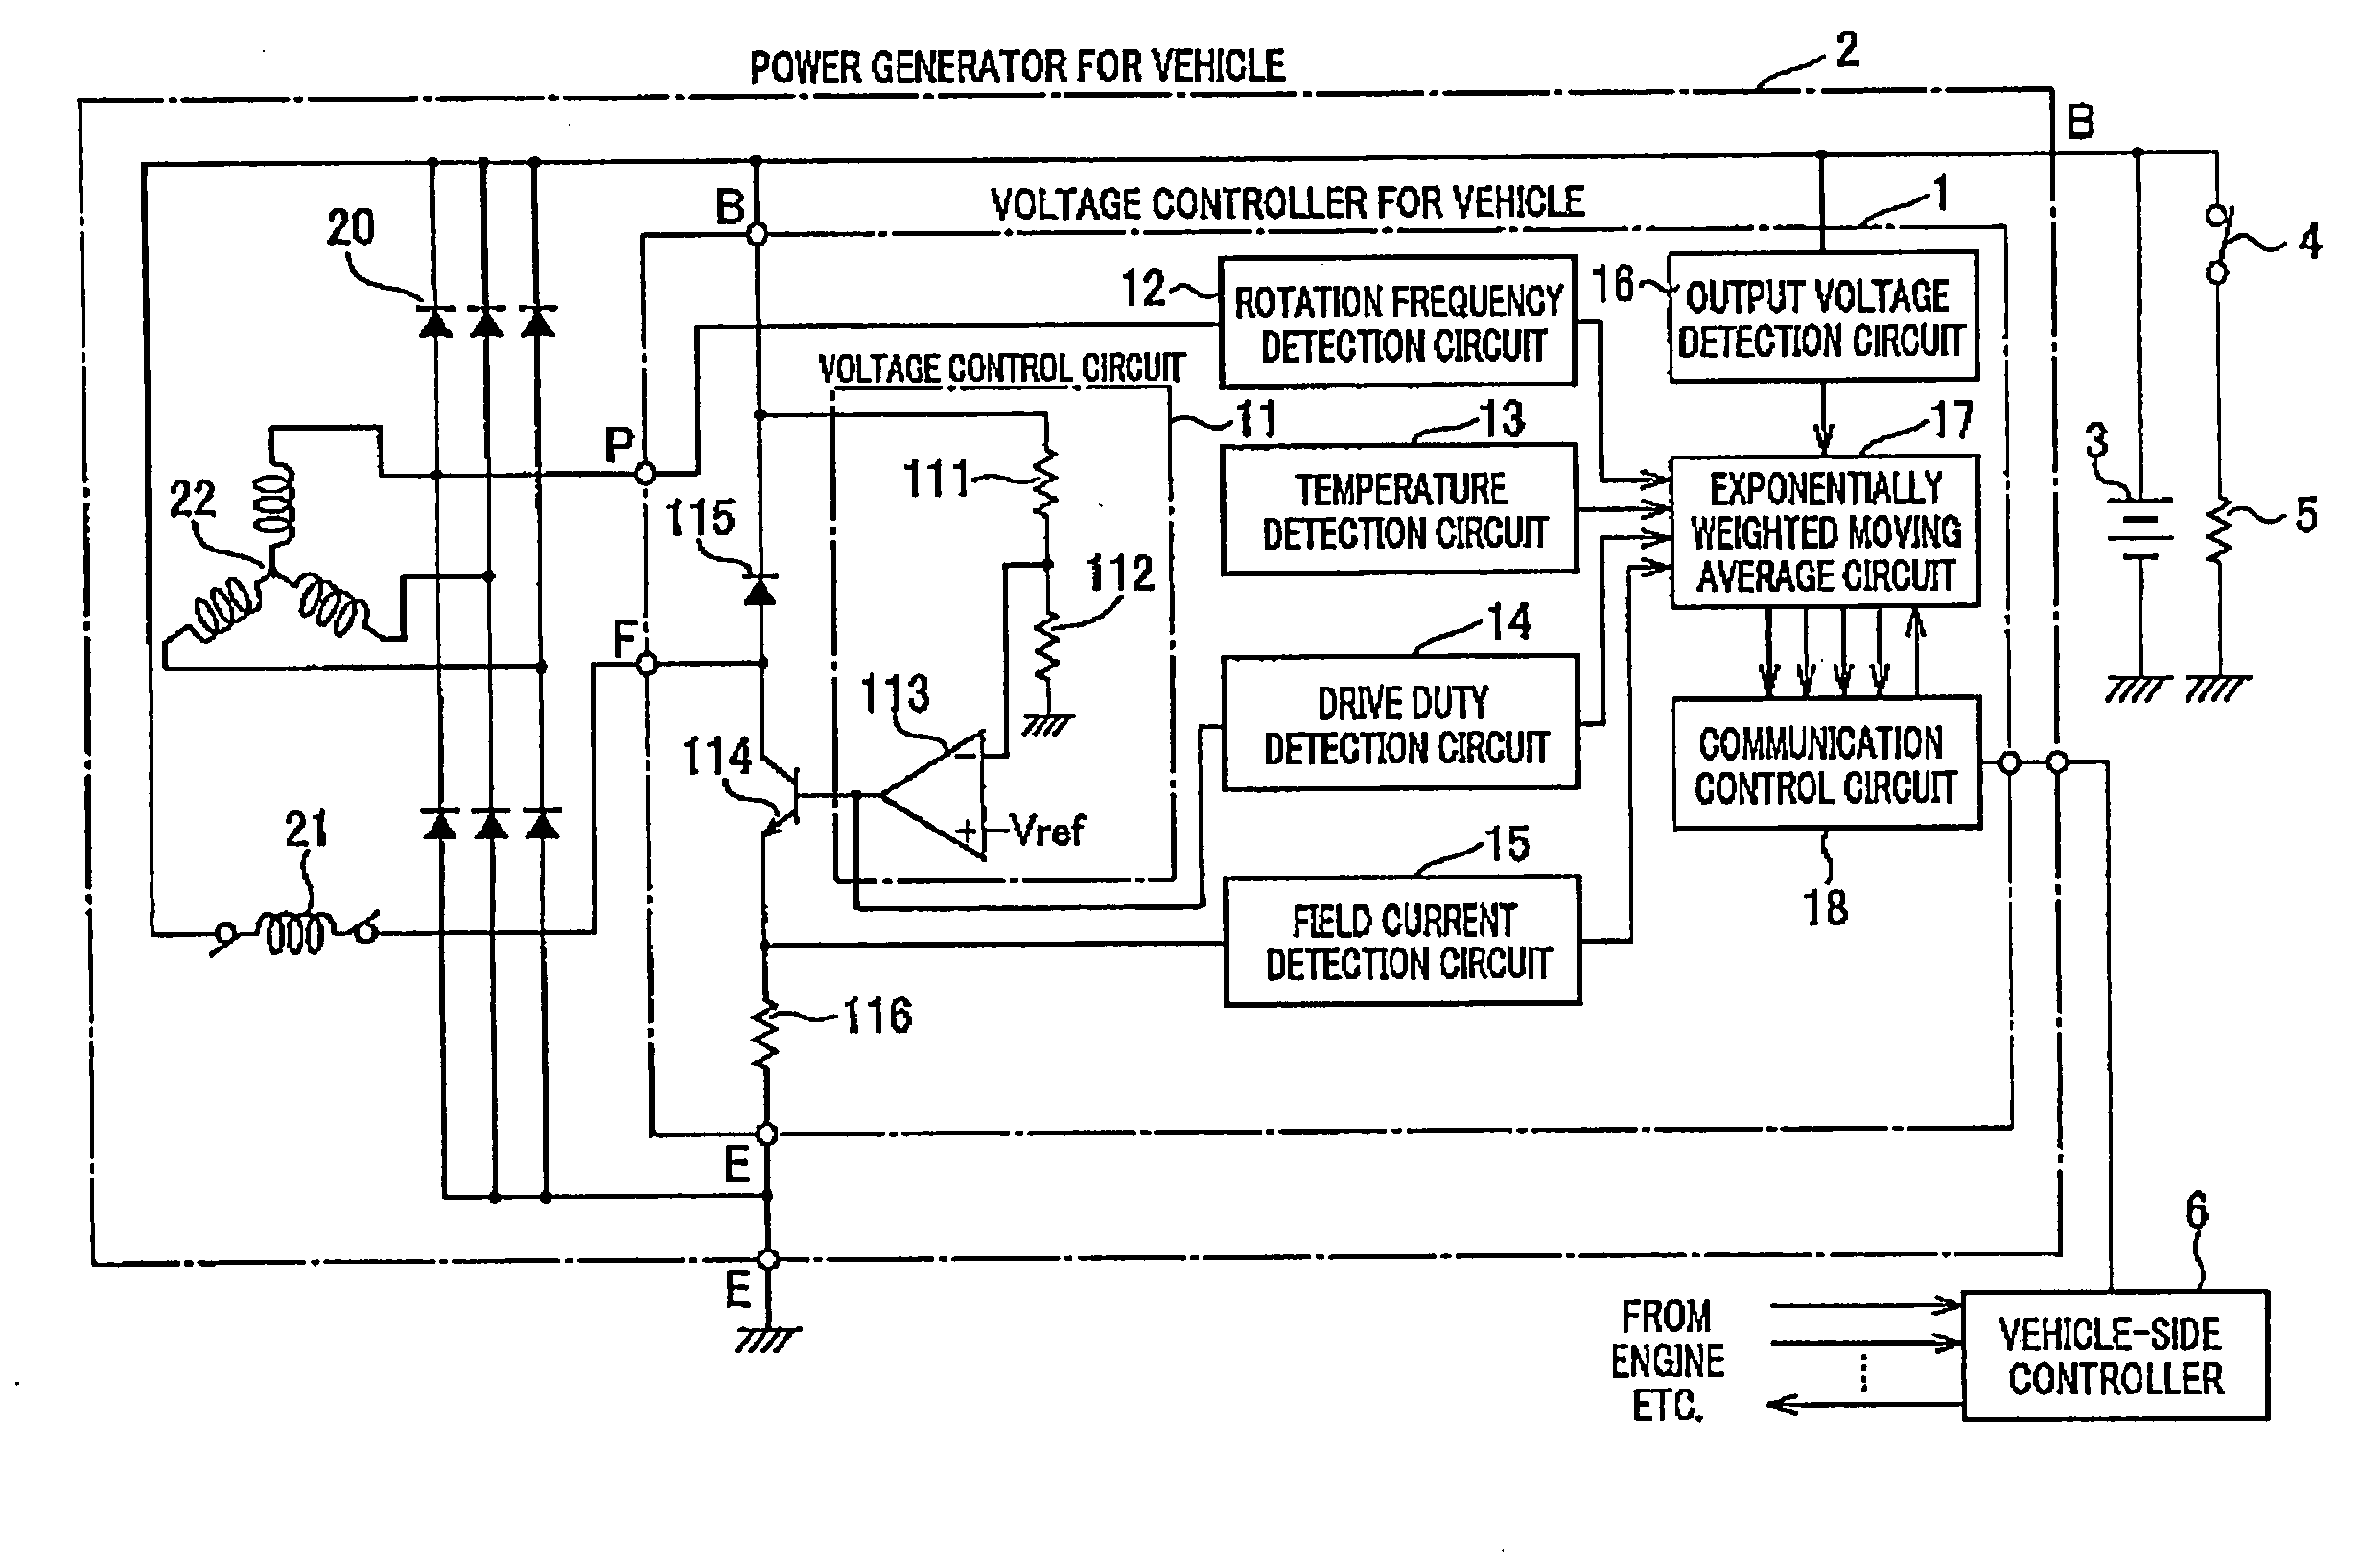 Voltage controller for vehicle using averaged status signal